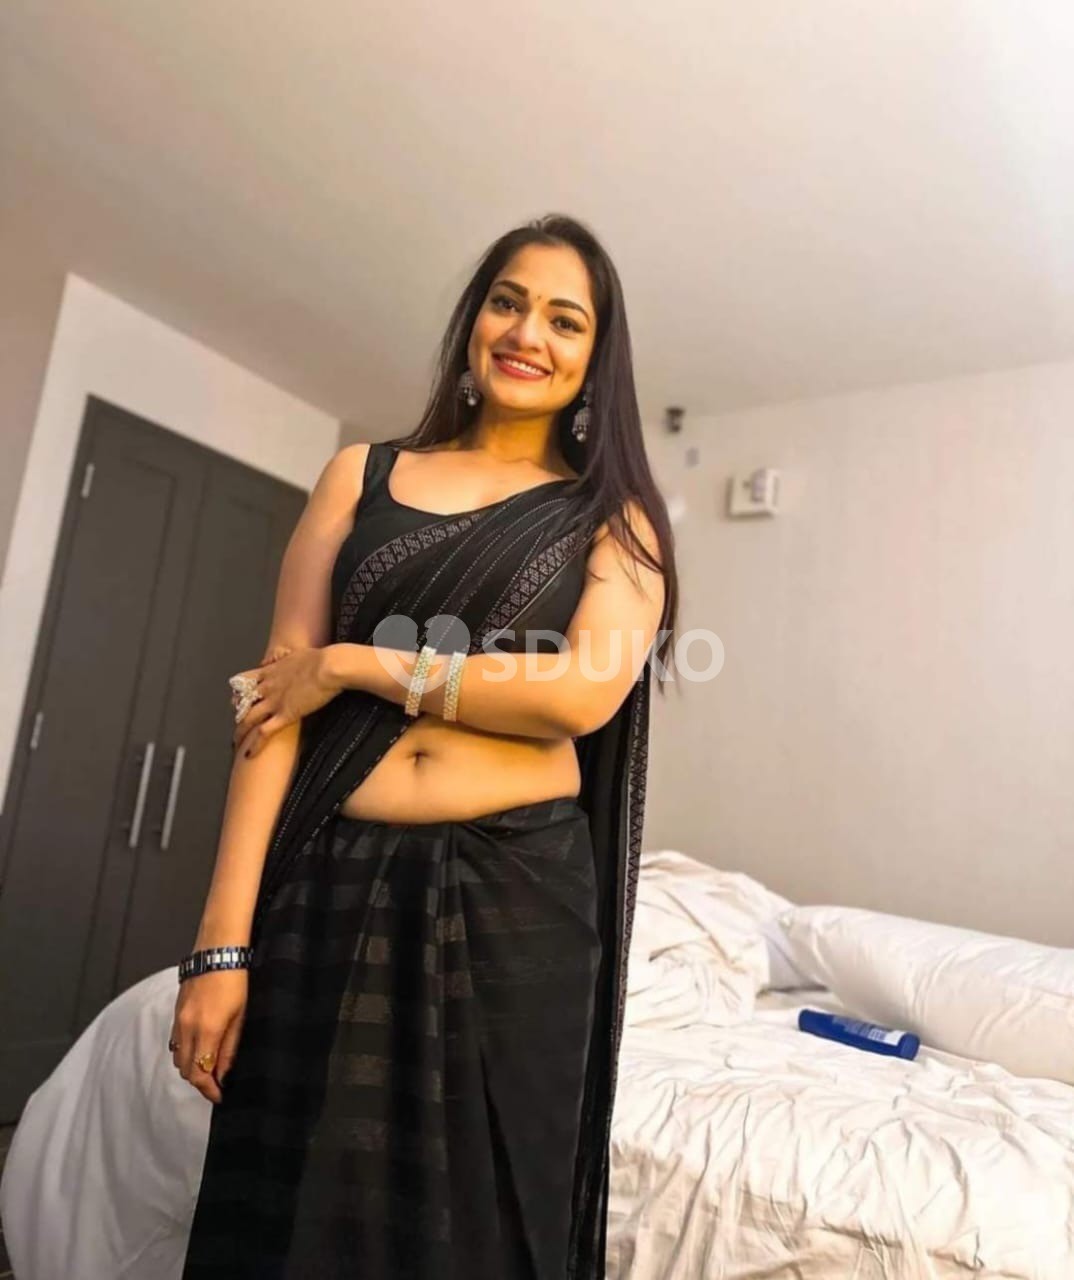 Domlur ✨ call girl service ⭐24 available VIP genuine service out call in ✨call available ⭐⭐⭐⭐⭐⭐⭐